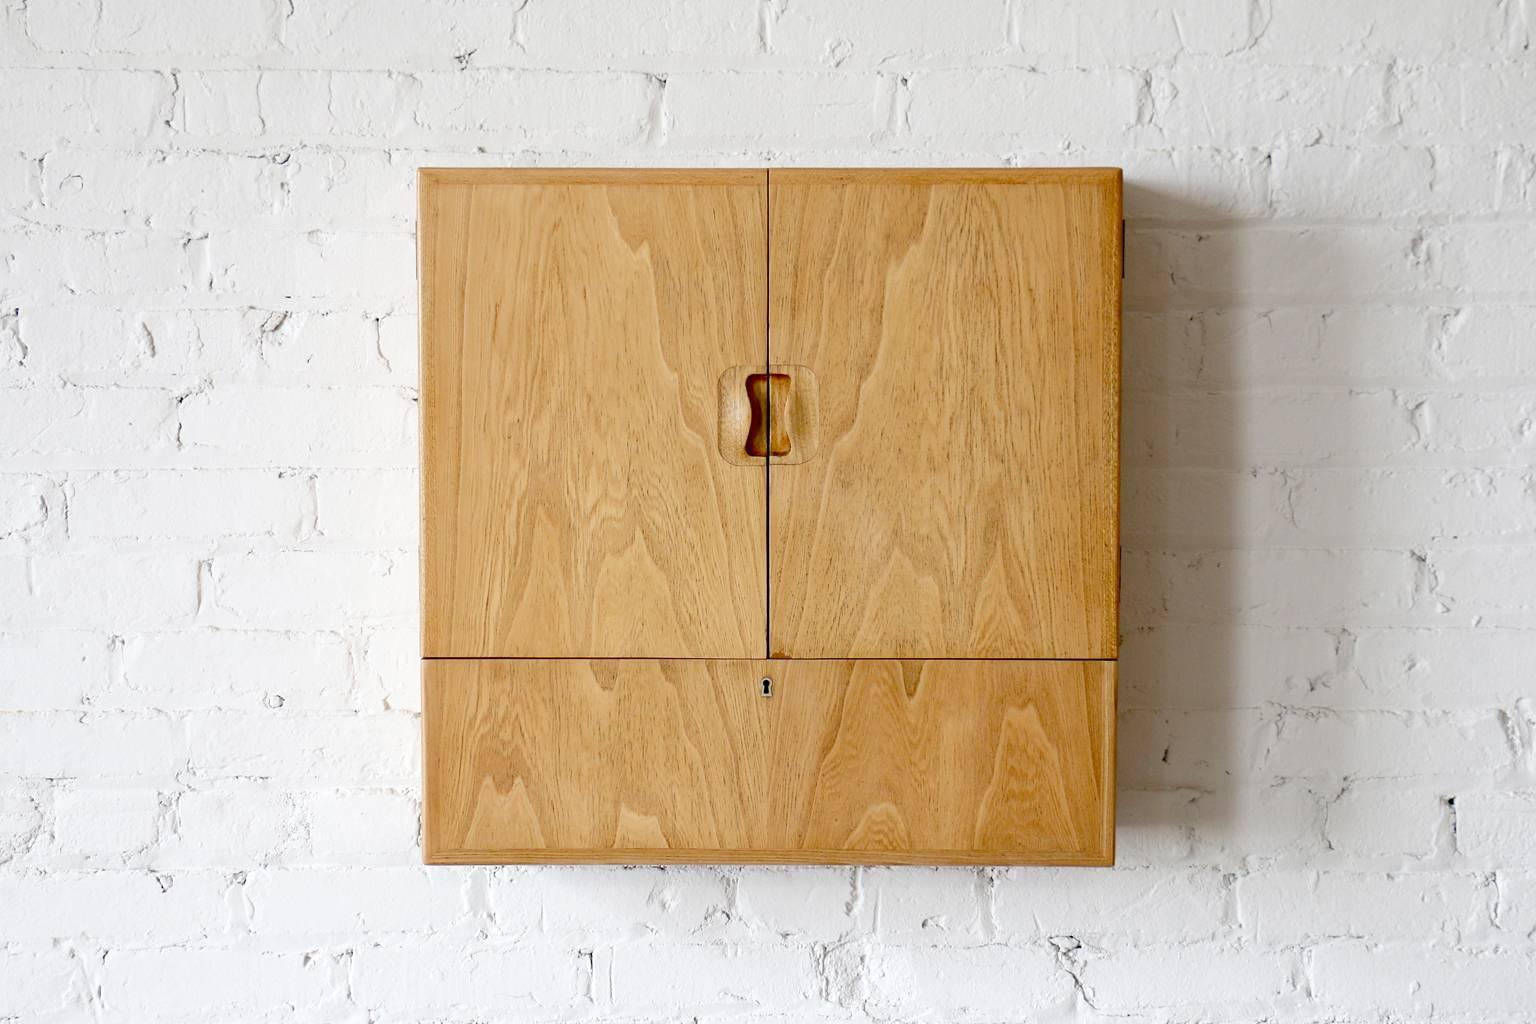 Model "Young Lady Wanted".
Rarely seen design.
Constructed of elm.
Designed in 1941.

A rarely seen wall cabinet by Tove & Edvard Kindt-Larsen for Gustav Bertelsen. This piece was cleverly named "Young Lady Wanted" and